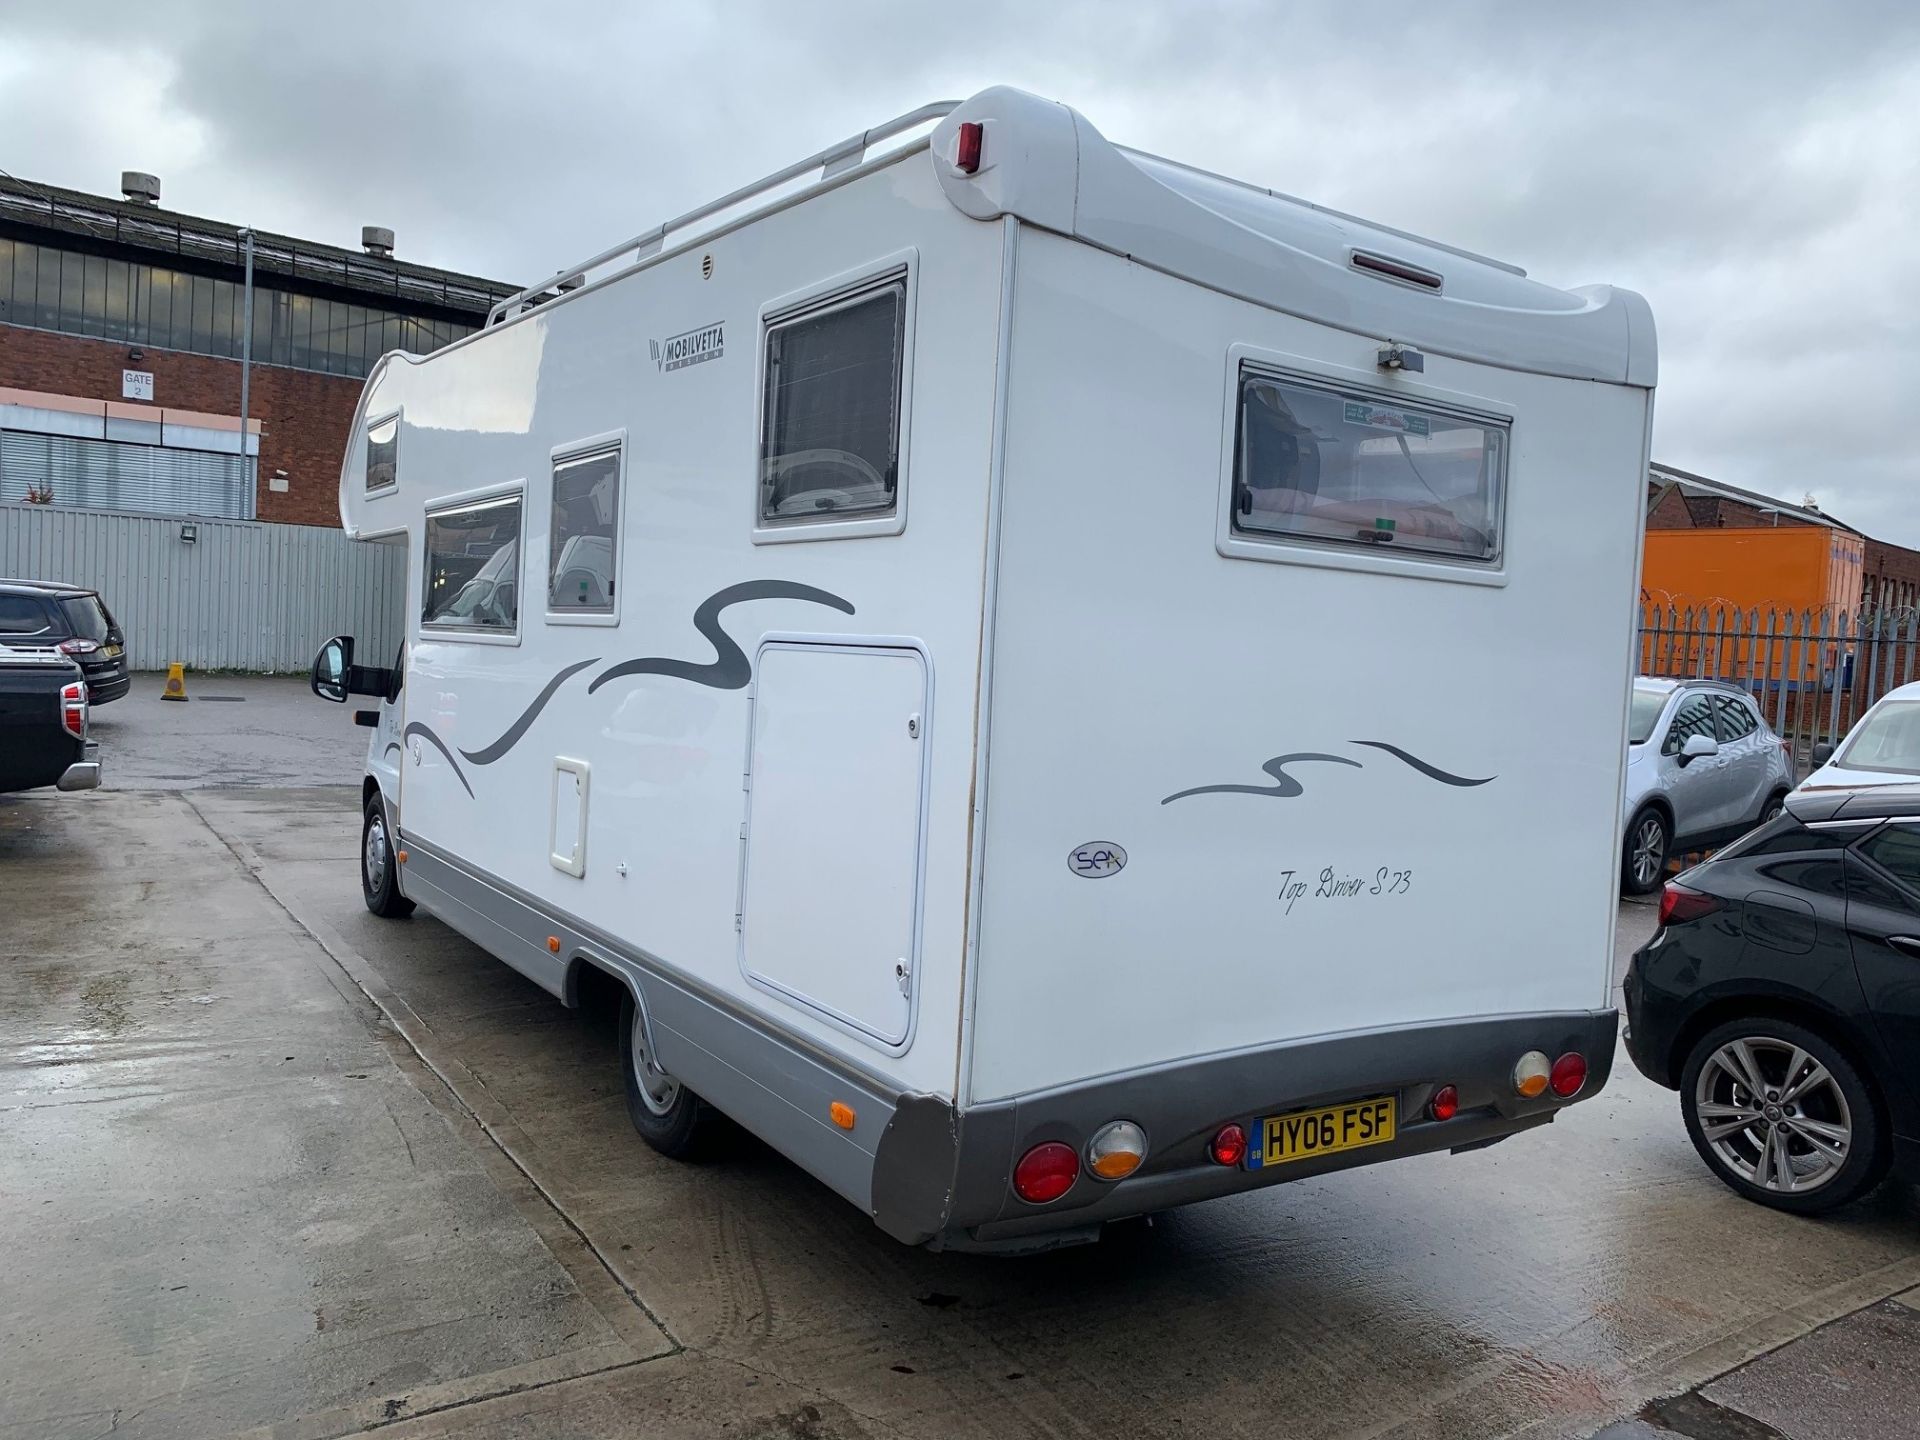 Fiat Mobilvetta Topdriver S73 Motorhome, 2.8L, Diesel, Only 17000 Miles, MOT'd Until May 2020 - Image 7 of 21